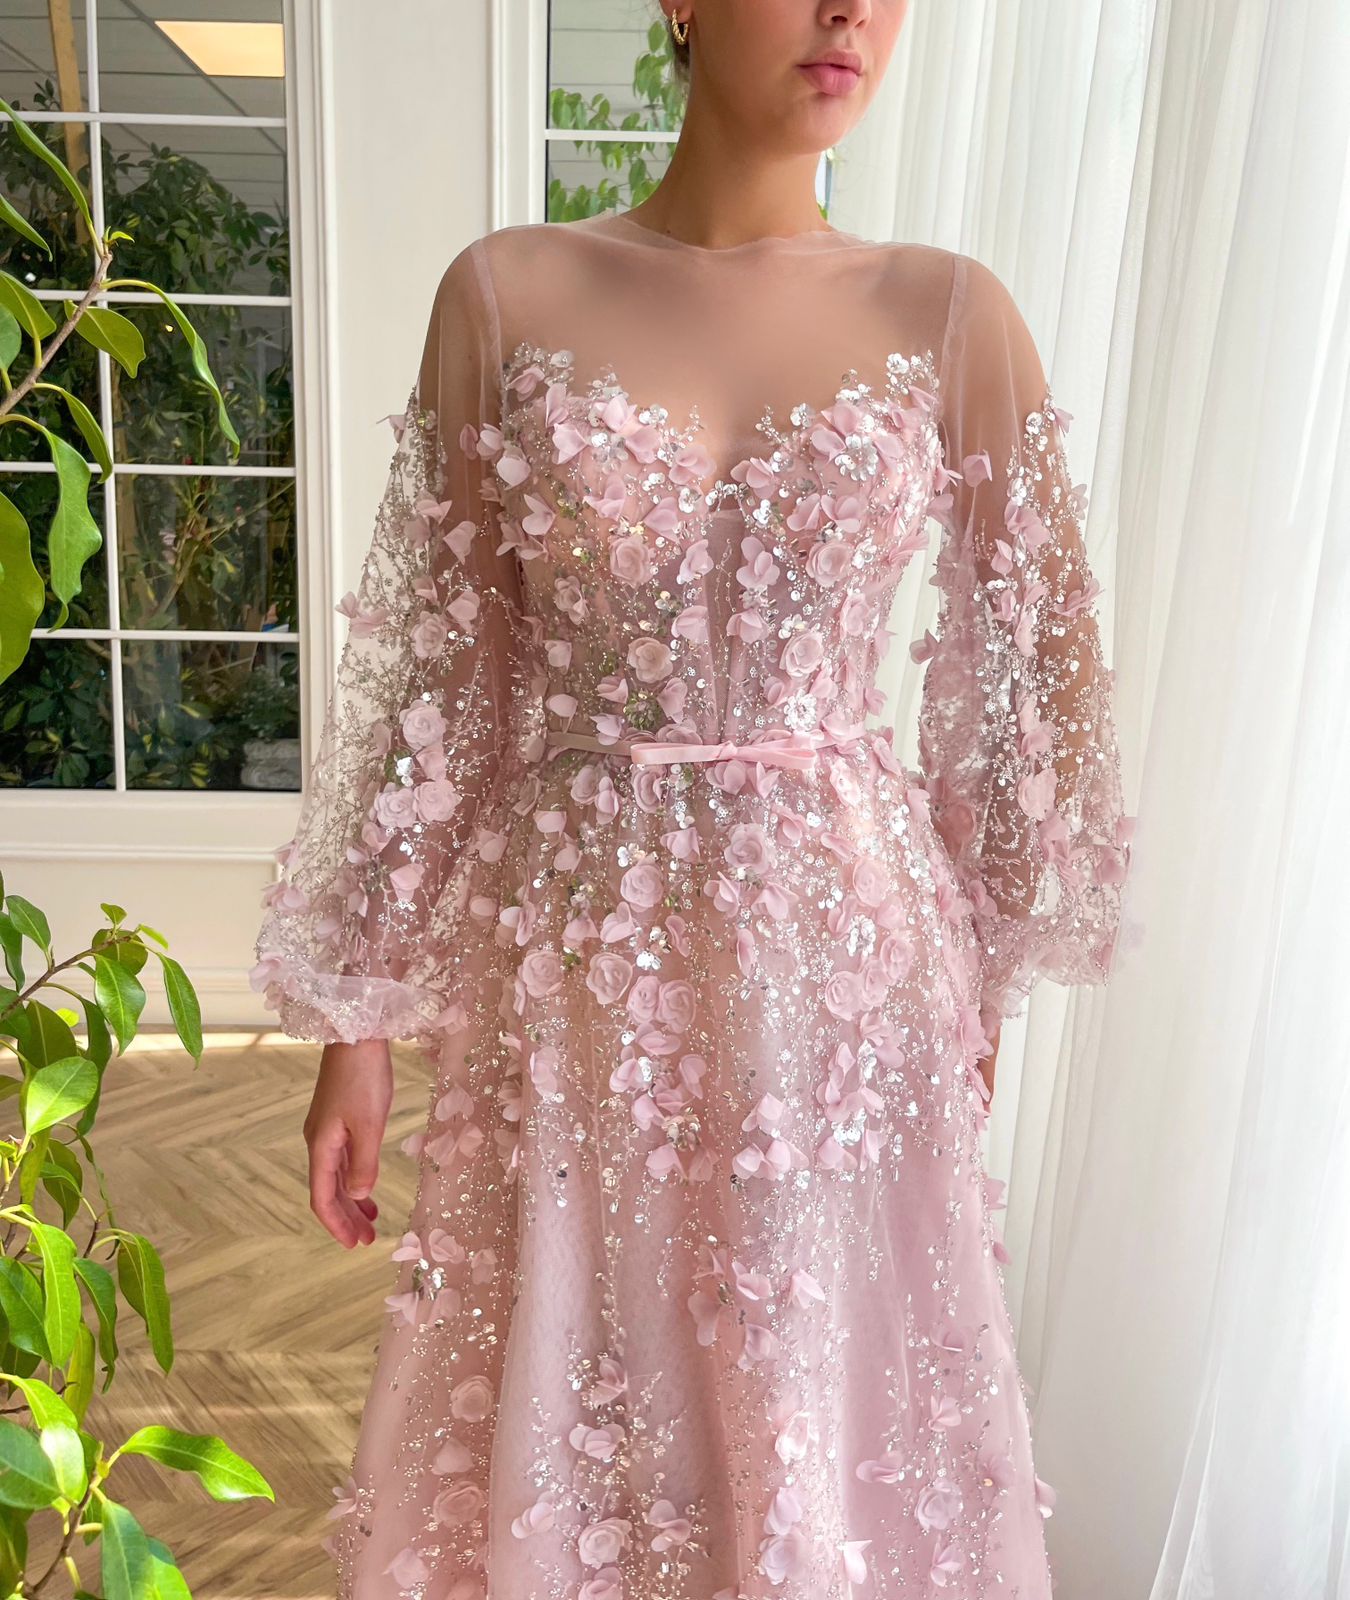 Pink A-Line dress with long sleeves and embroidery